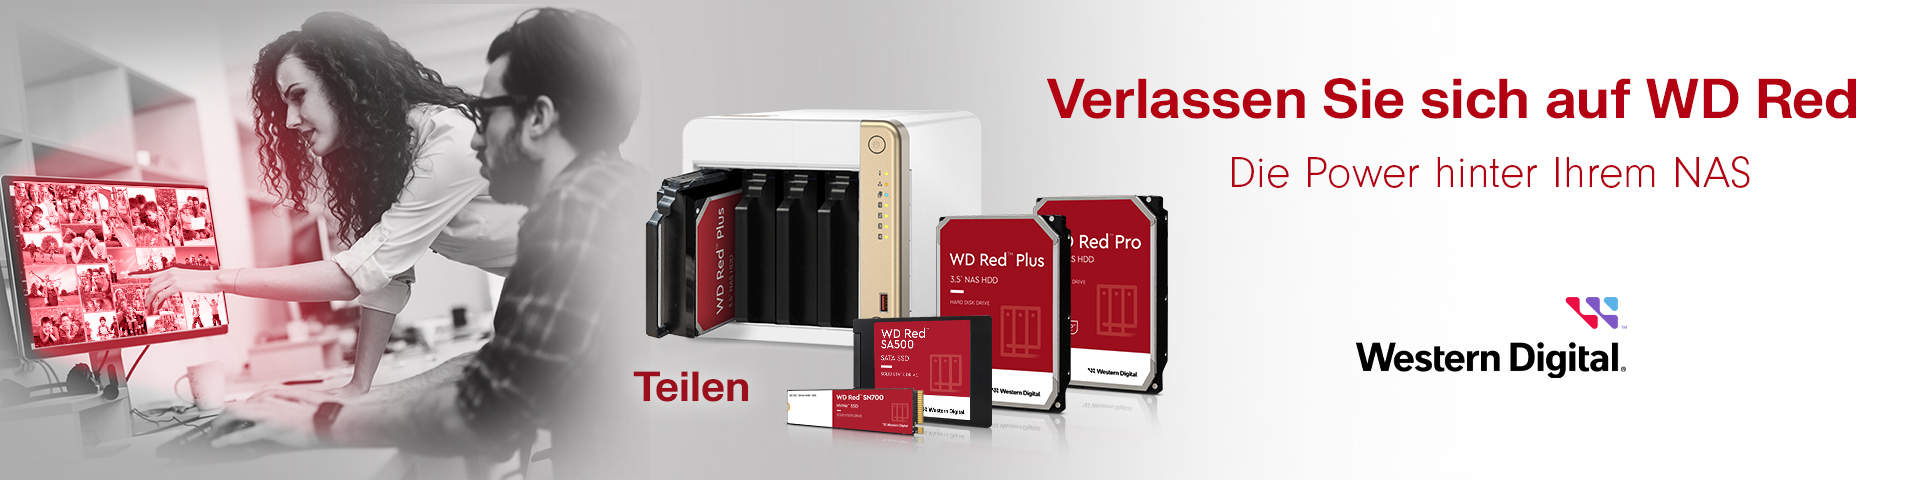 WD Red_Banner_Share_1920x480_DE